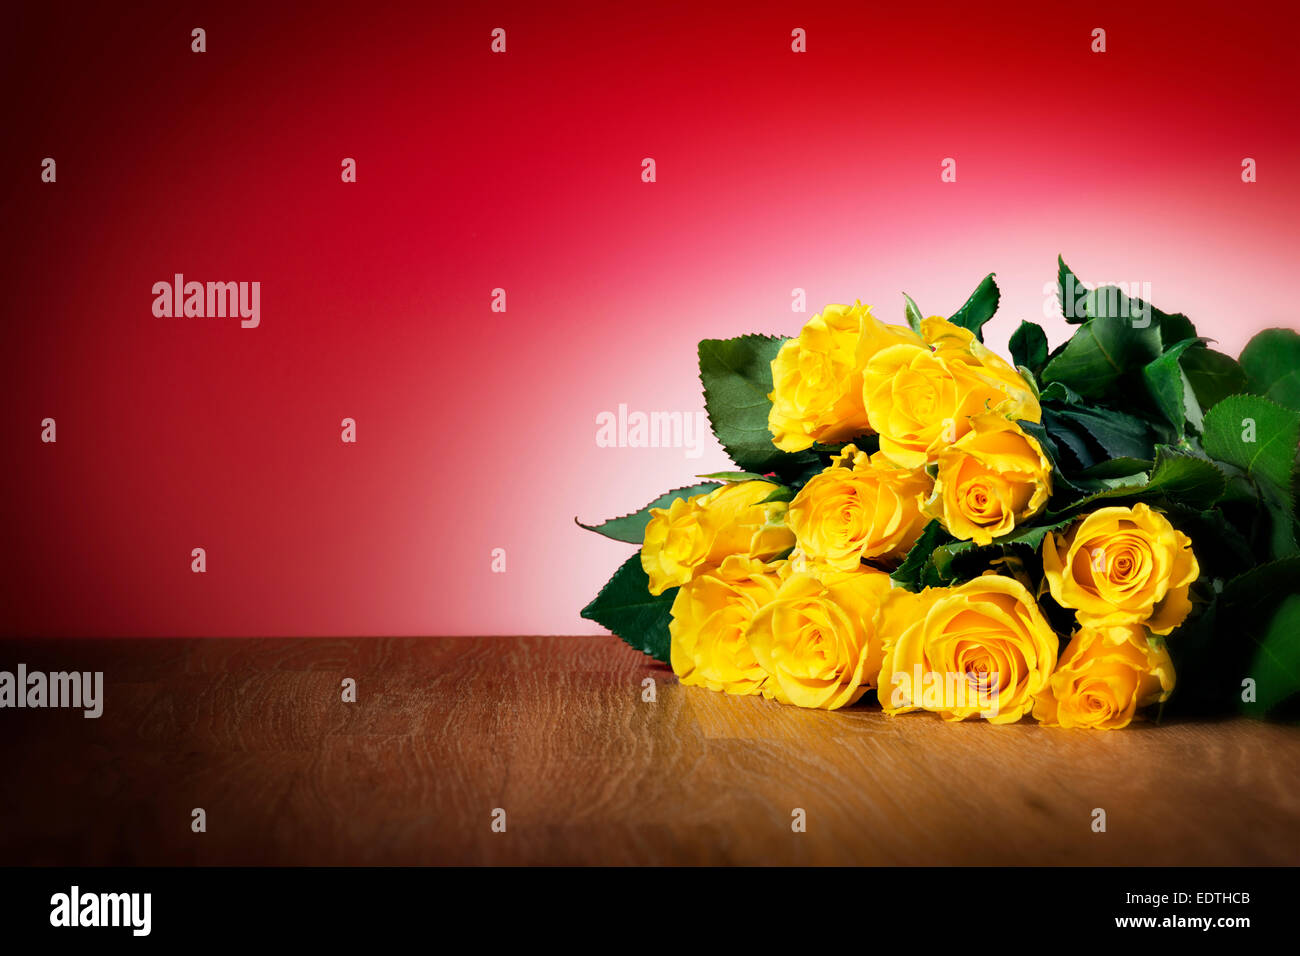 Bunch of yellow roses on a table and with red background, free space Stock Photo